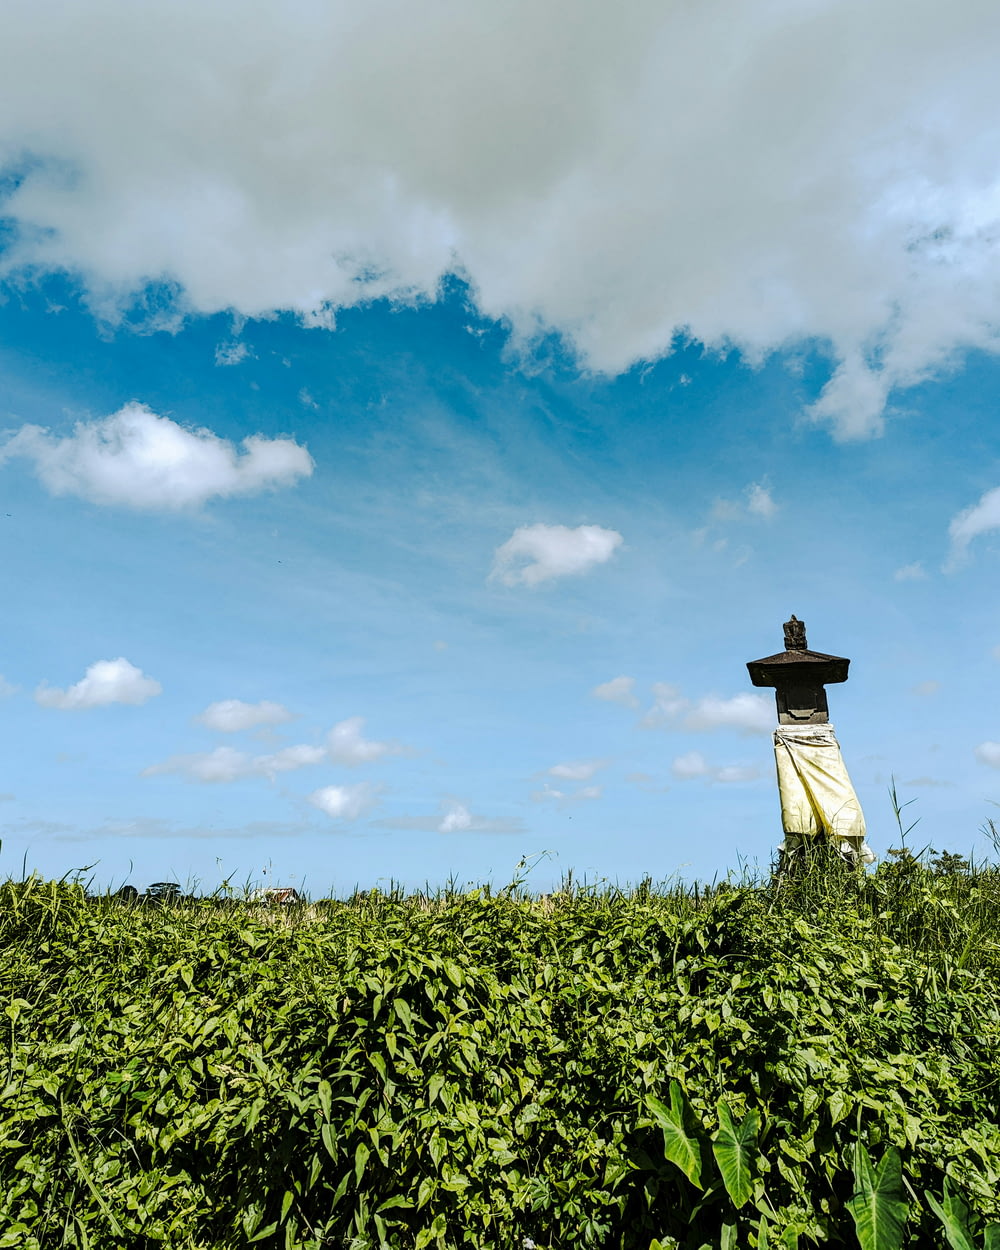 a statue in the middle of a lush green field